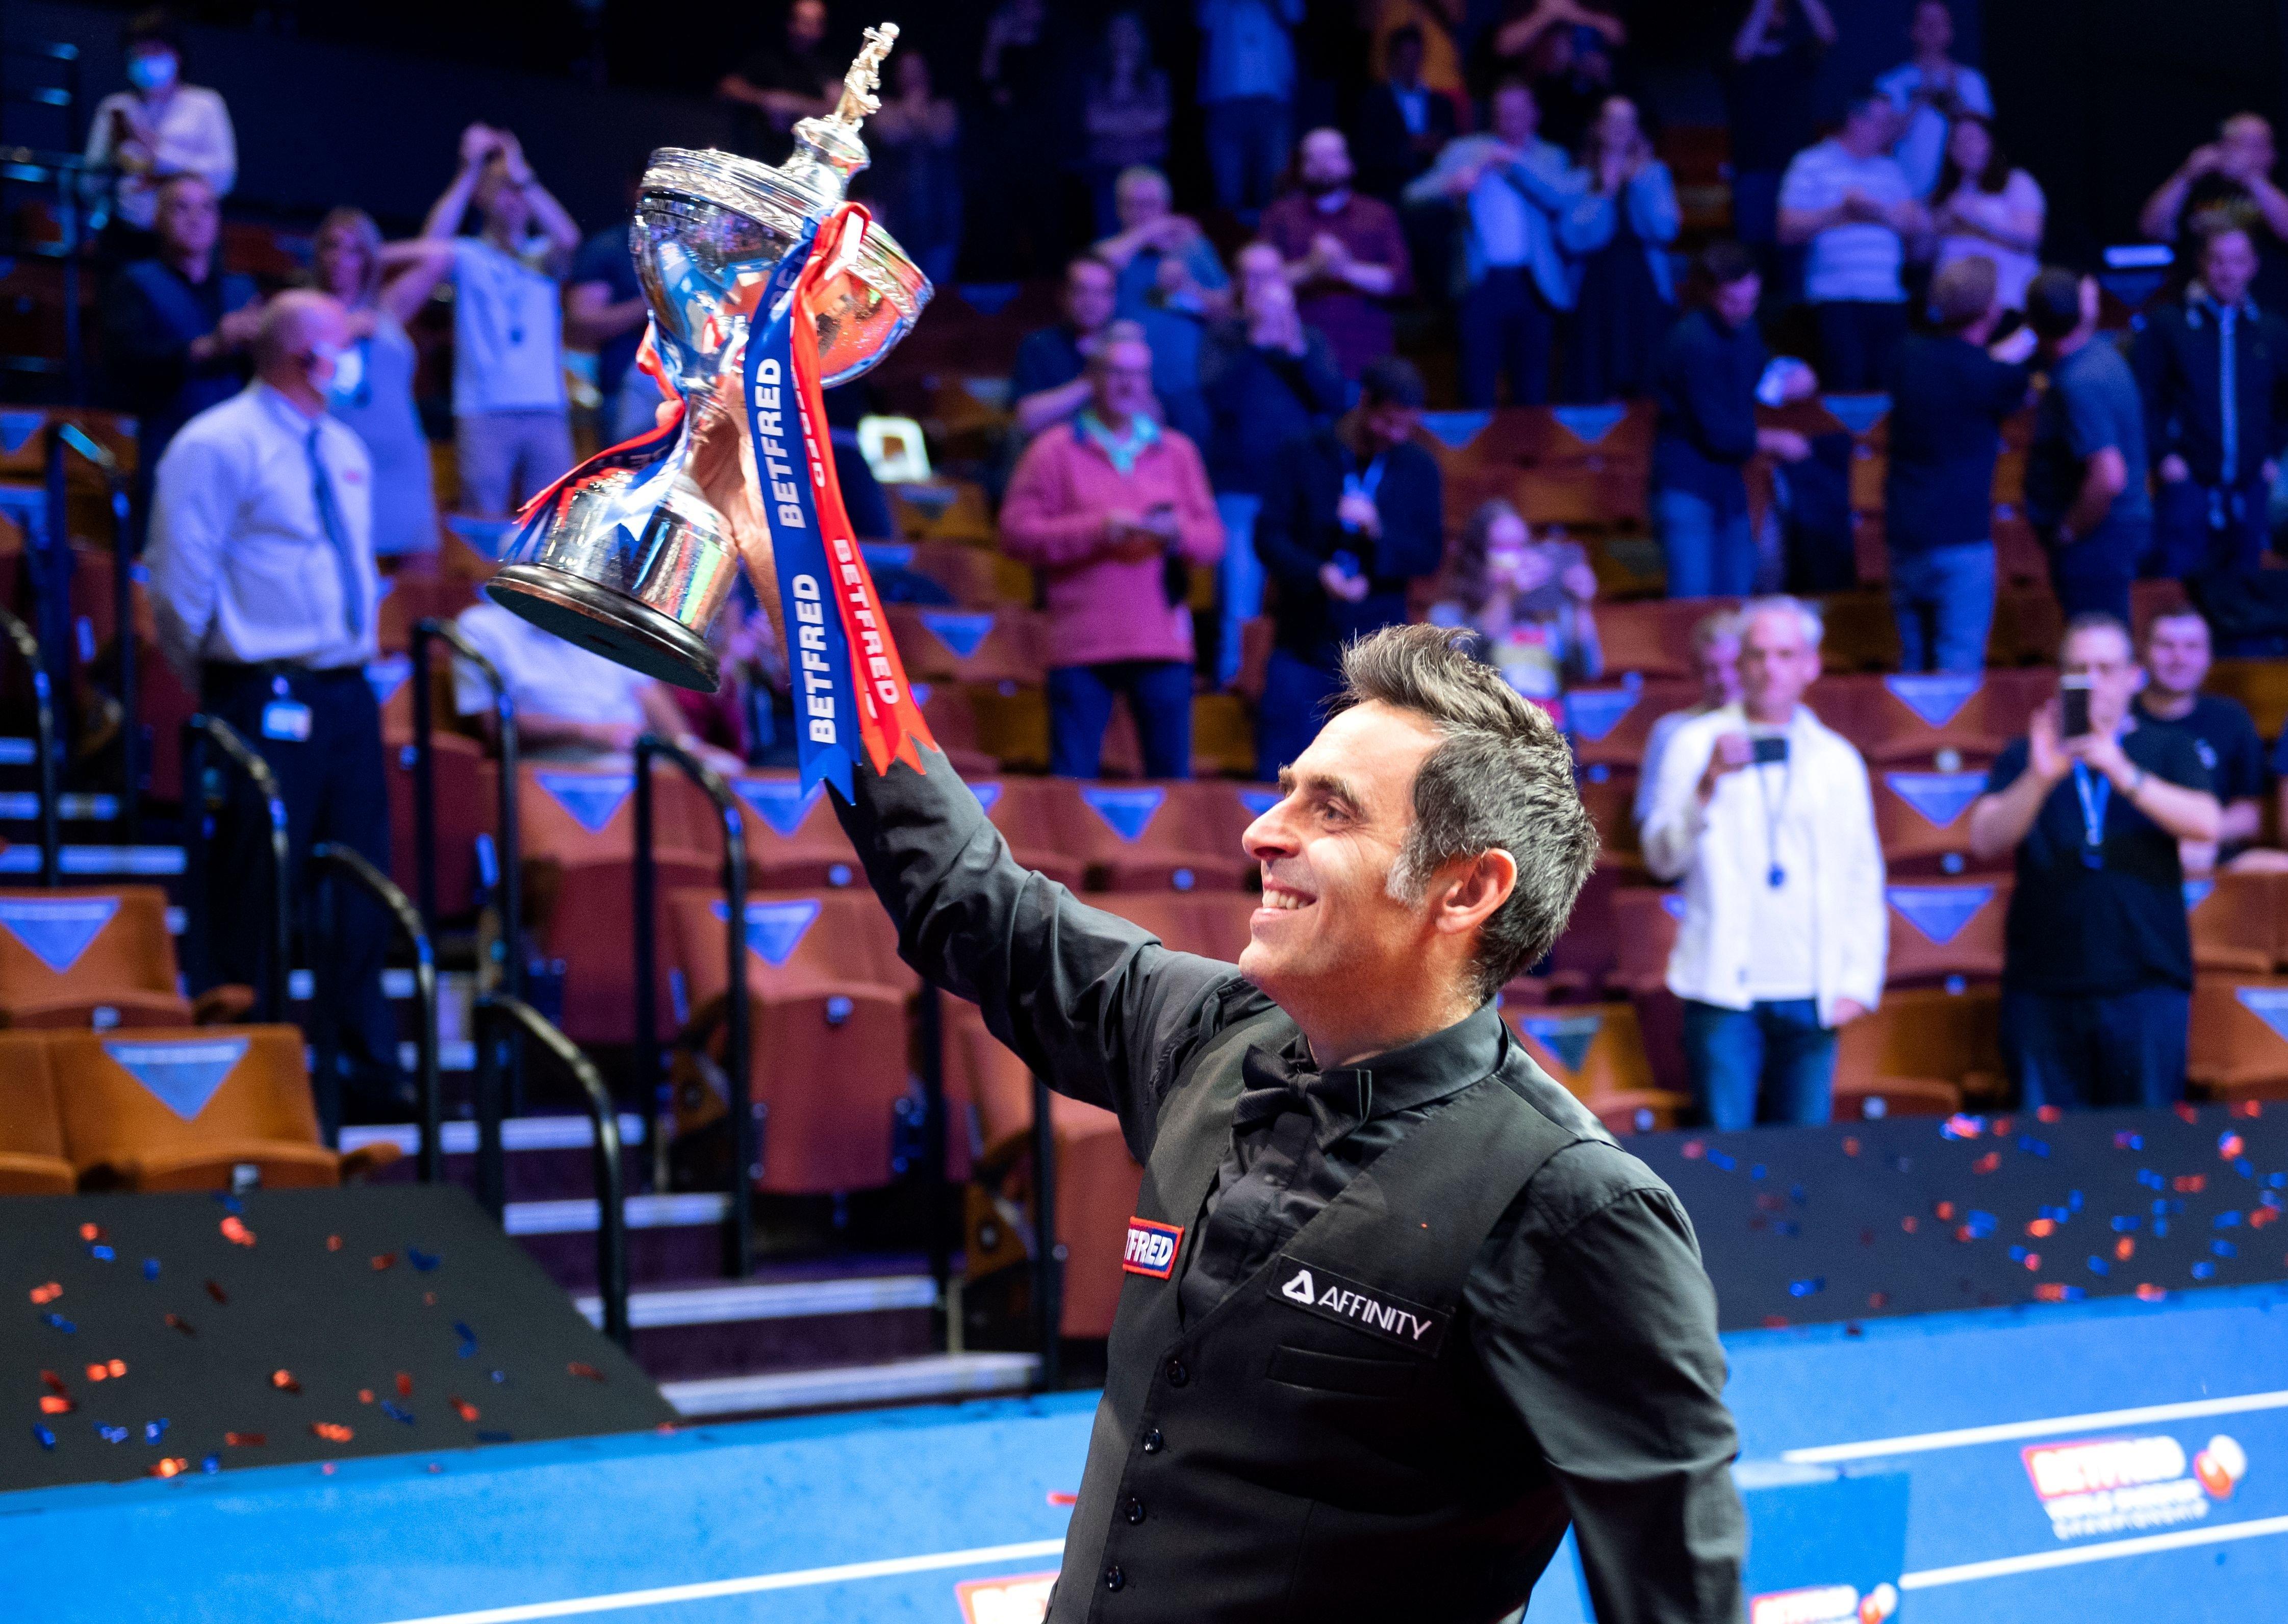 Ronnie OSullivan makes winning World Snooker title at Crucible feel like playing practice match at my club